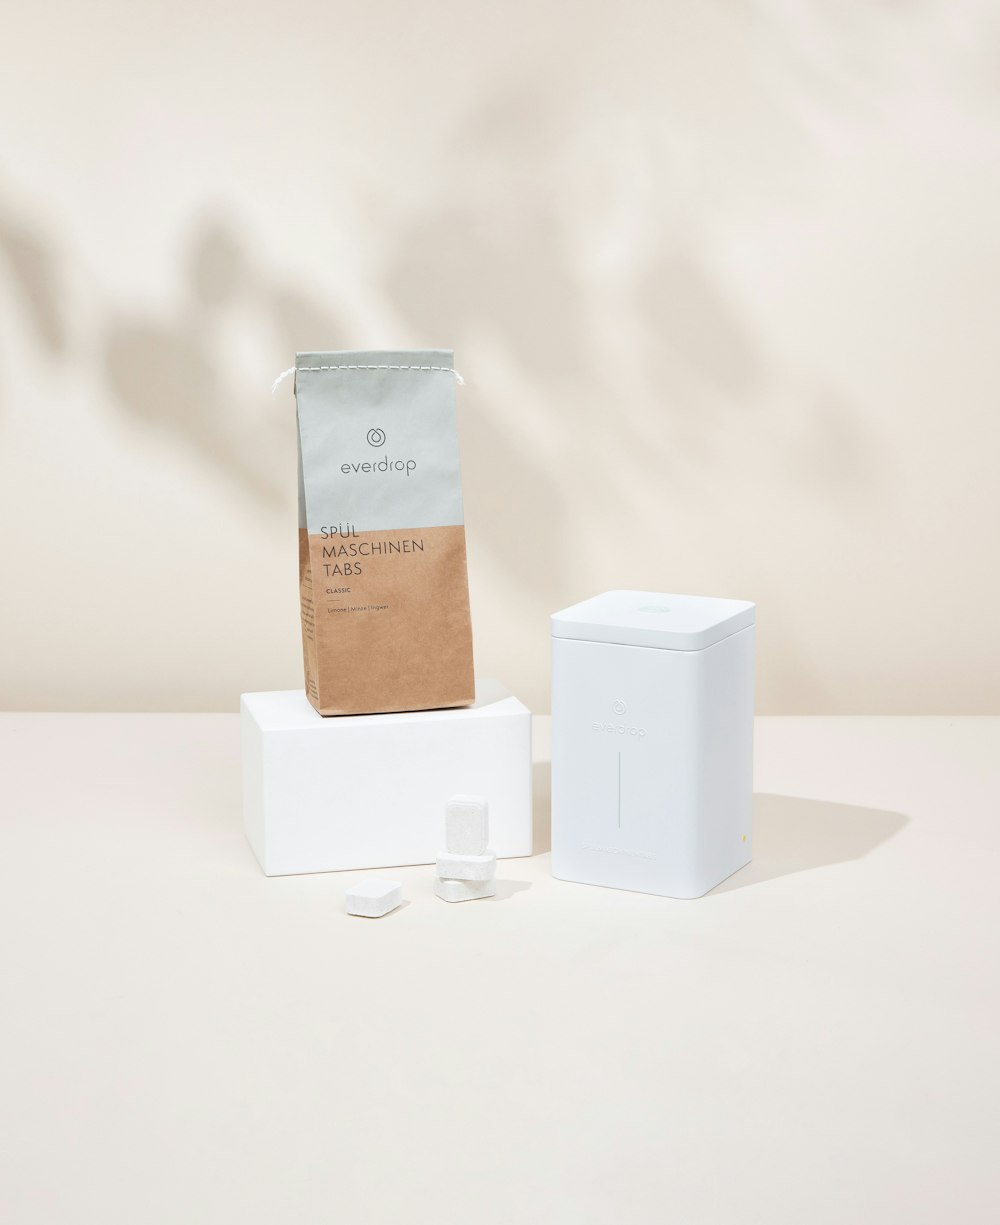 a bag of coffee sitting on top of a white box